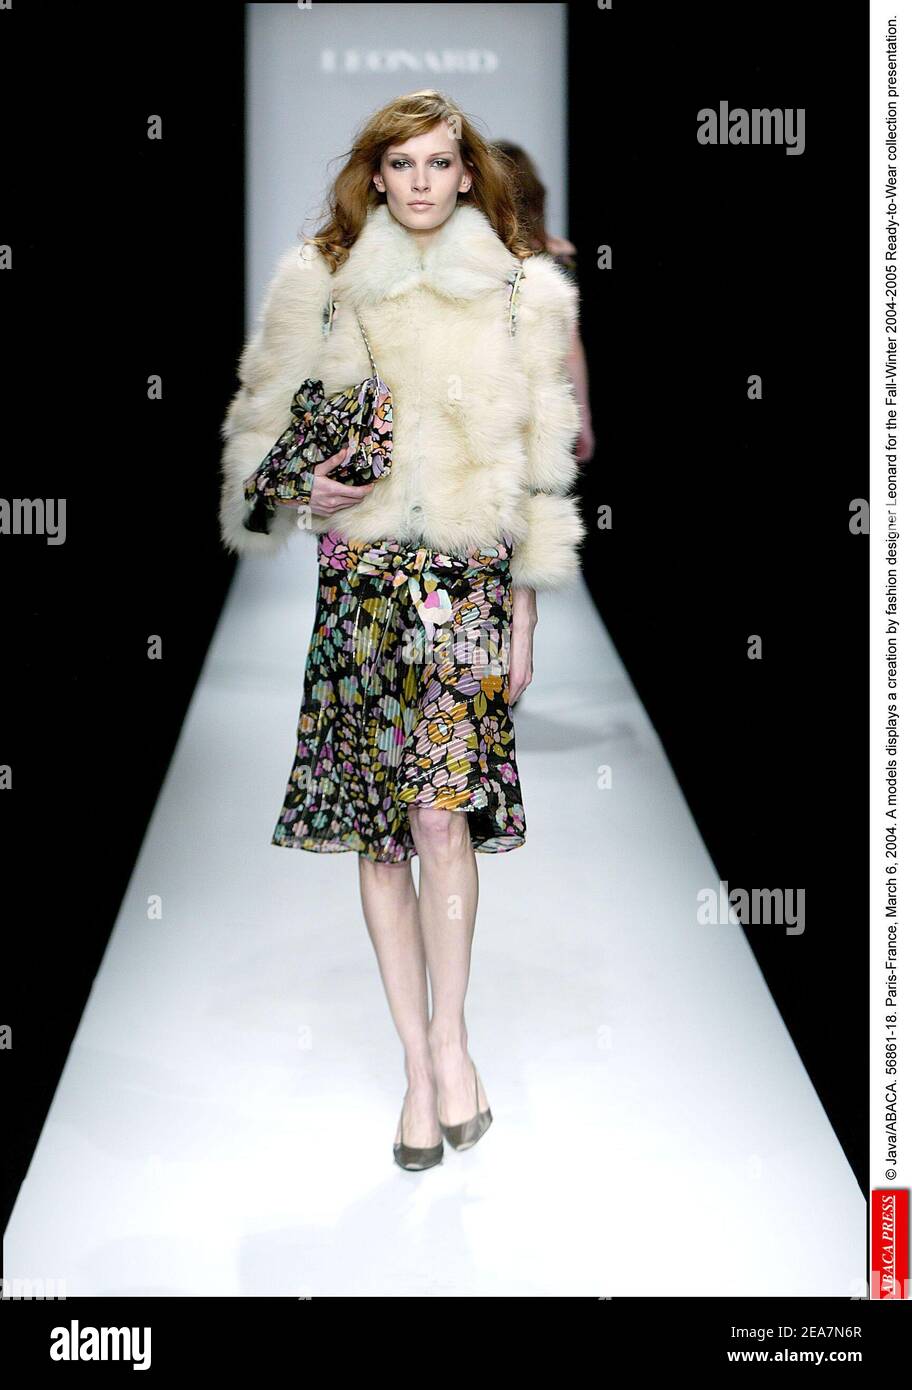 © Java/ABACA. 56861. Paris-France, March 6, 2004. A model displays a creation by fashion designer Leonard for the Fall-Winter 2004-2005 Ready-to-Wear collection presentation. Stock Photo